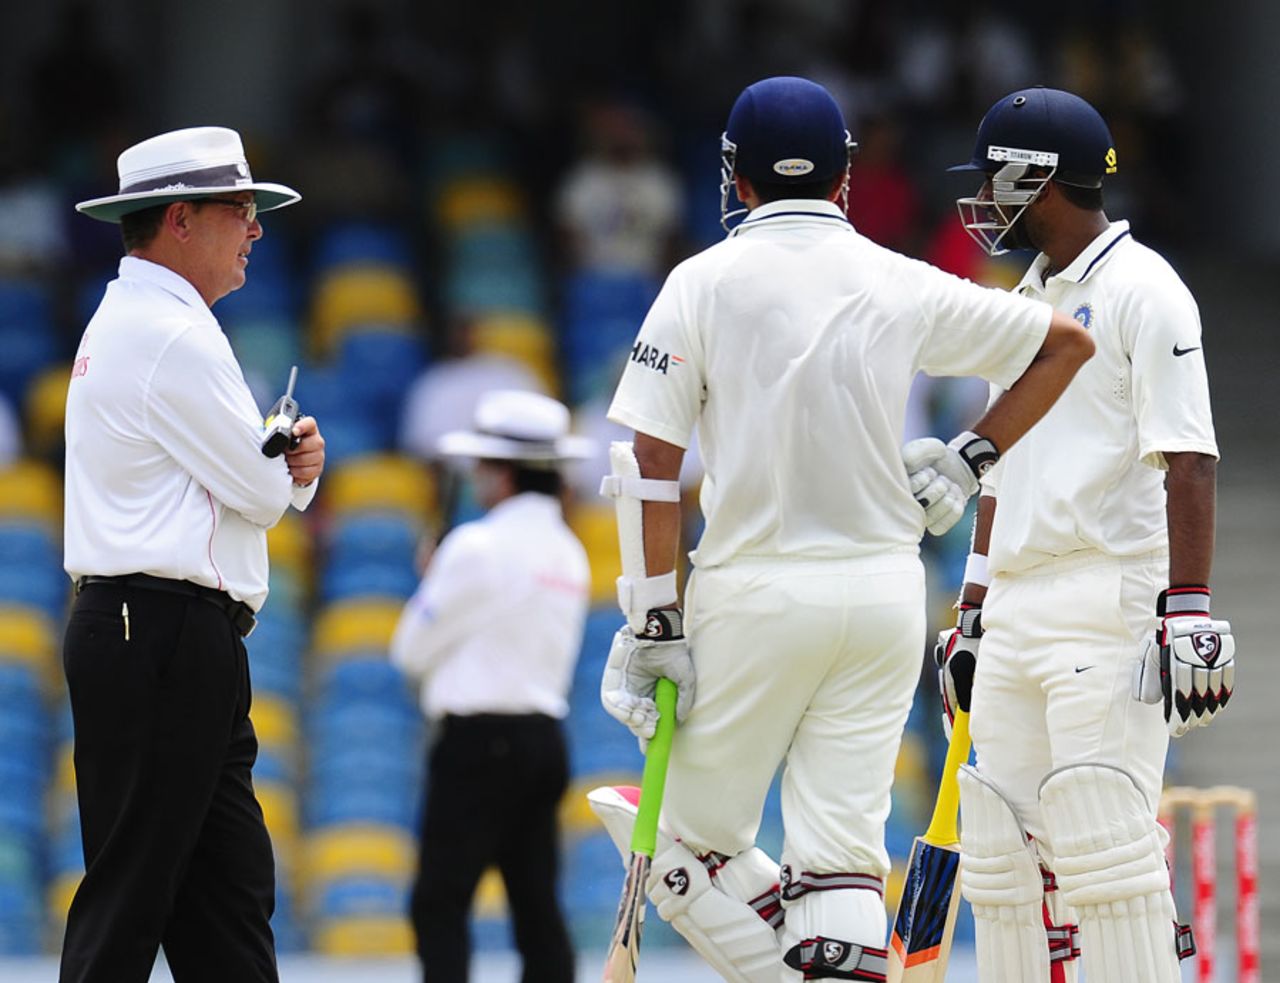 Umpire Ian Gould speaks with the batsmen before deciding to overturn the appeal for catch against Rahul Dravid, West Indies v India, 2nd Test, Bridgetown, 4th day, July 1, 2011 